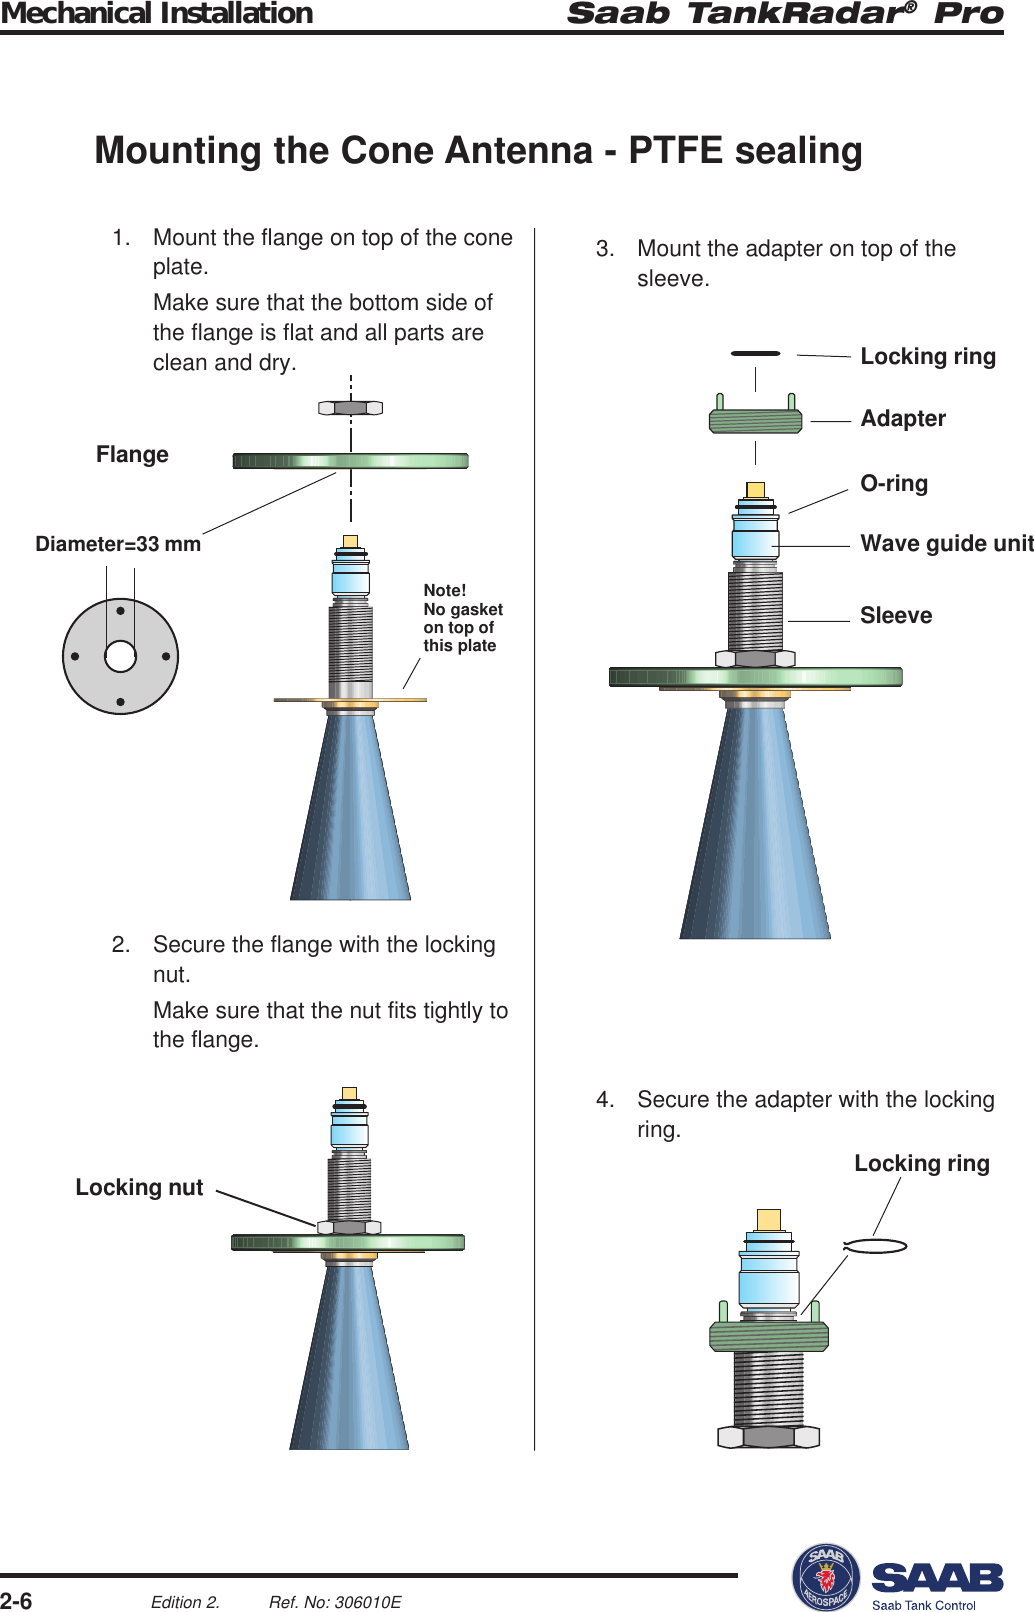 Saab TankRadar® ProMechanical Installation2-6Edition 2. Ref. No: 306010ELocking ringWave guide unitAdapterSleeveLocking ringLocking nutO-ringFlangeDiameter=33 mmNote!No gasketon top ofthis plateMounting the Cone Antenna - PTFE sealing1. Mount the flange on top of the coneplate.Make sure that the bottom side ofthe flange is flat and all parts areclean and dry.2. Secure the flange with the lockingnut.Make sure that the nut fits tightly tothe flange.3. Mount the adapter on top of thesleeve.4. Secure the adapter with the lockingring.